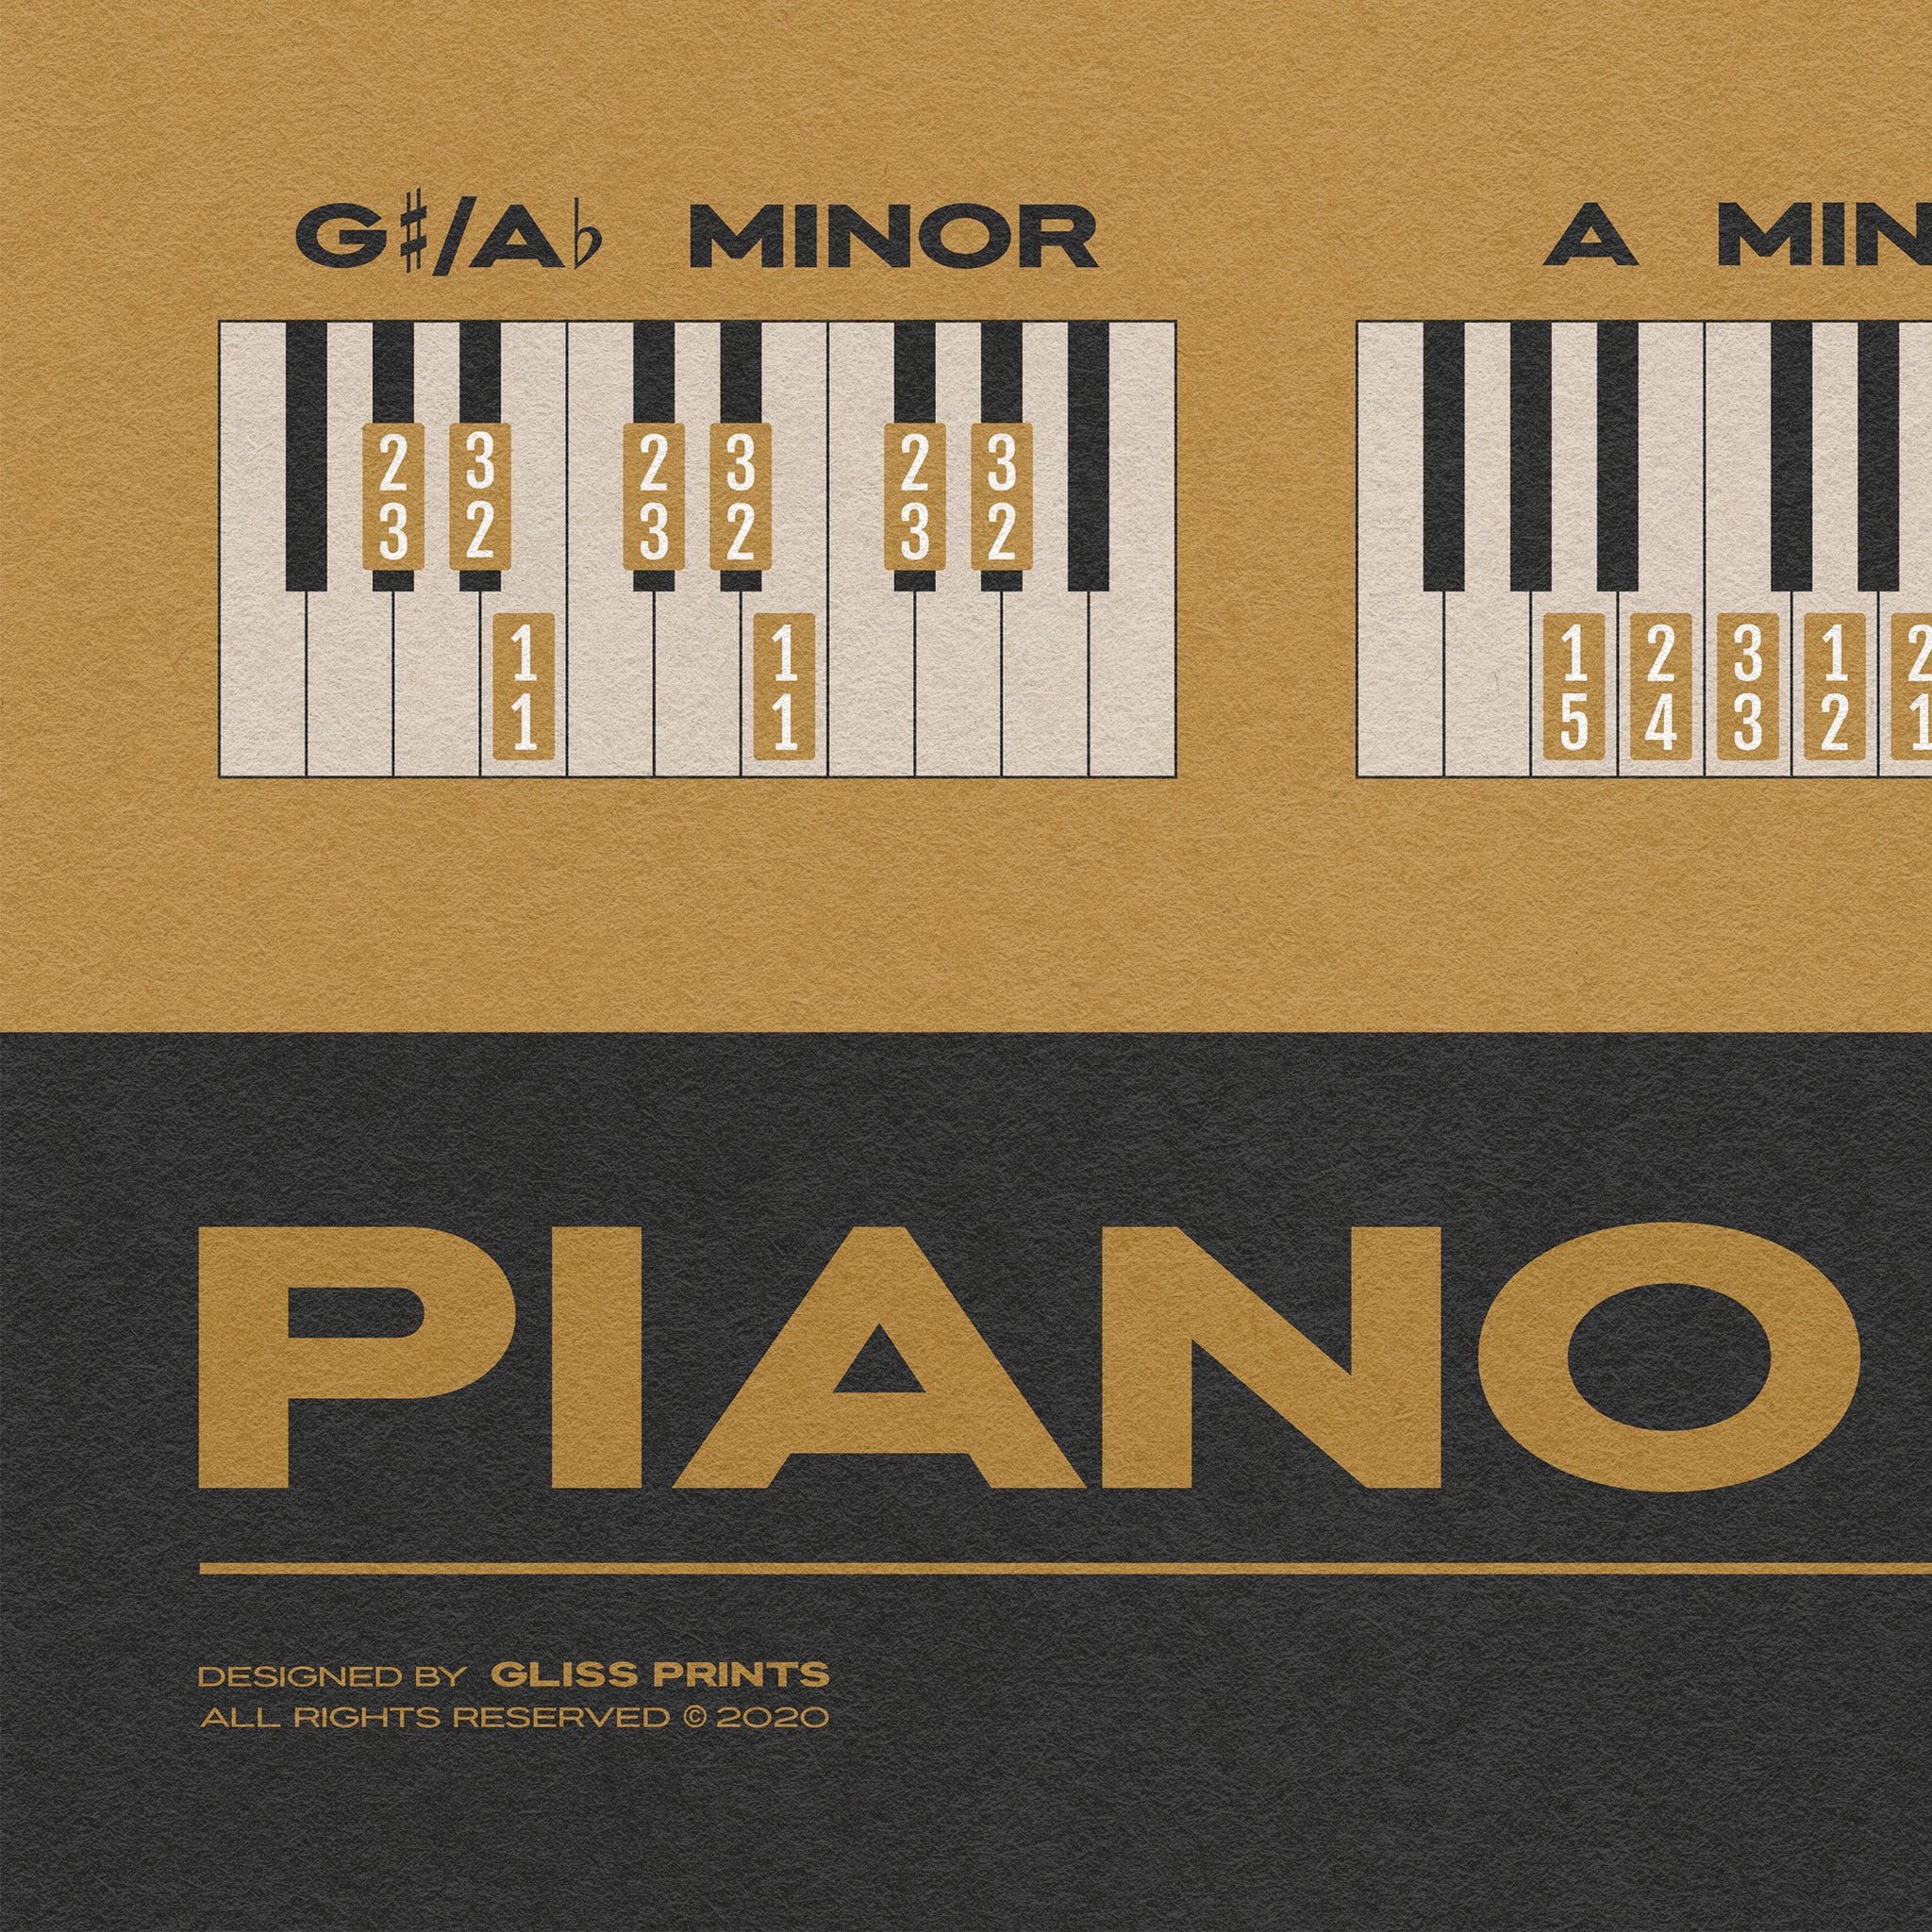 Piano Scales Chart, Yellow